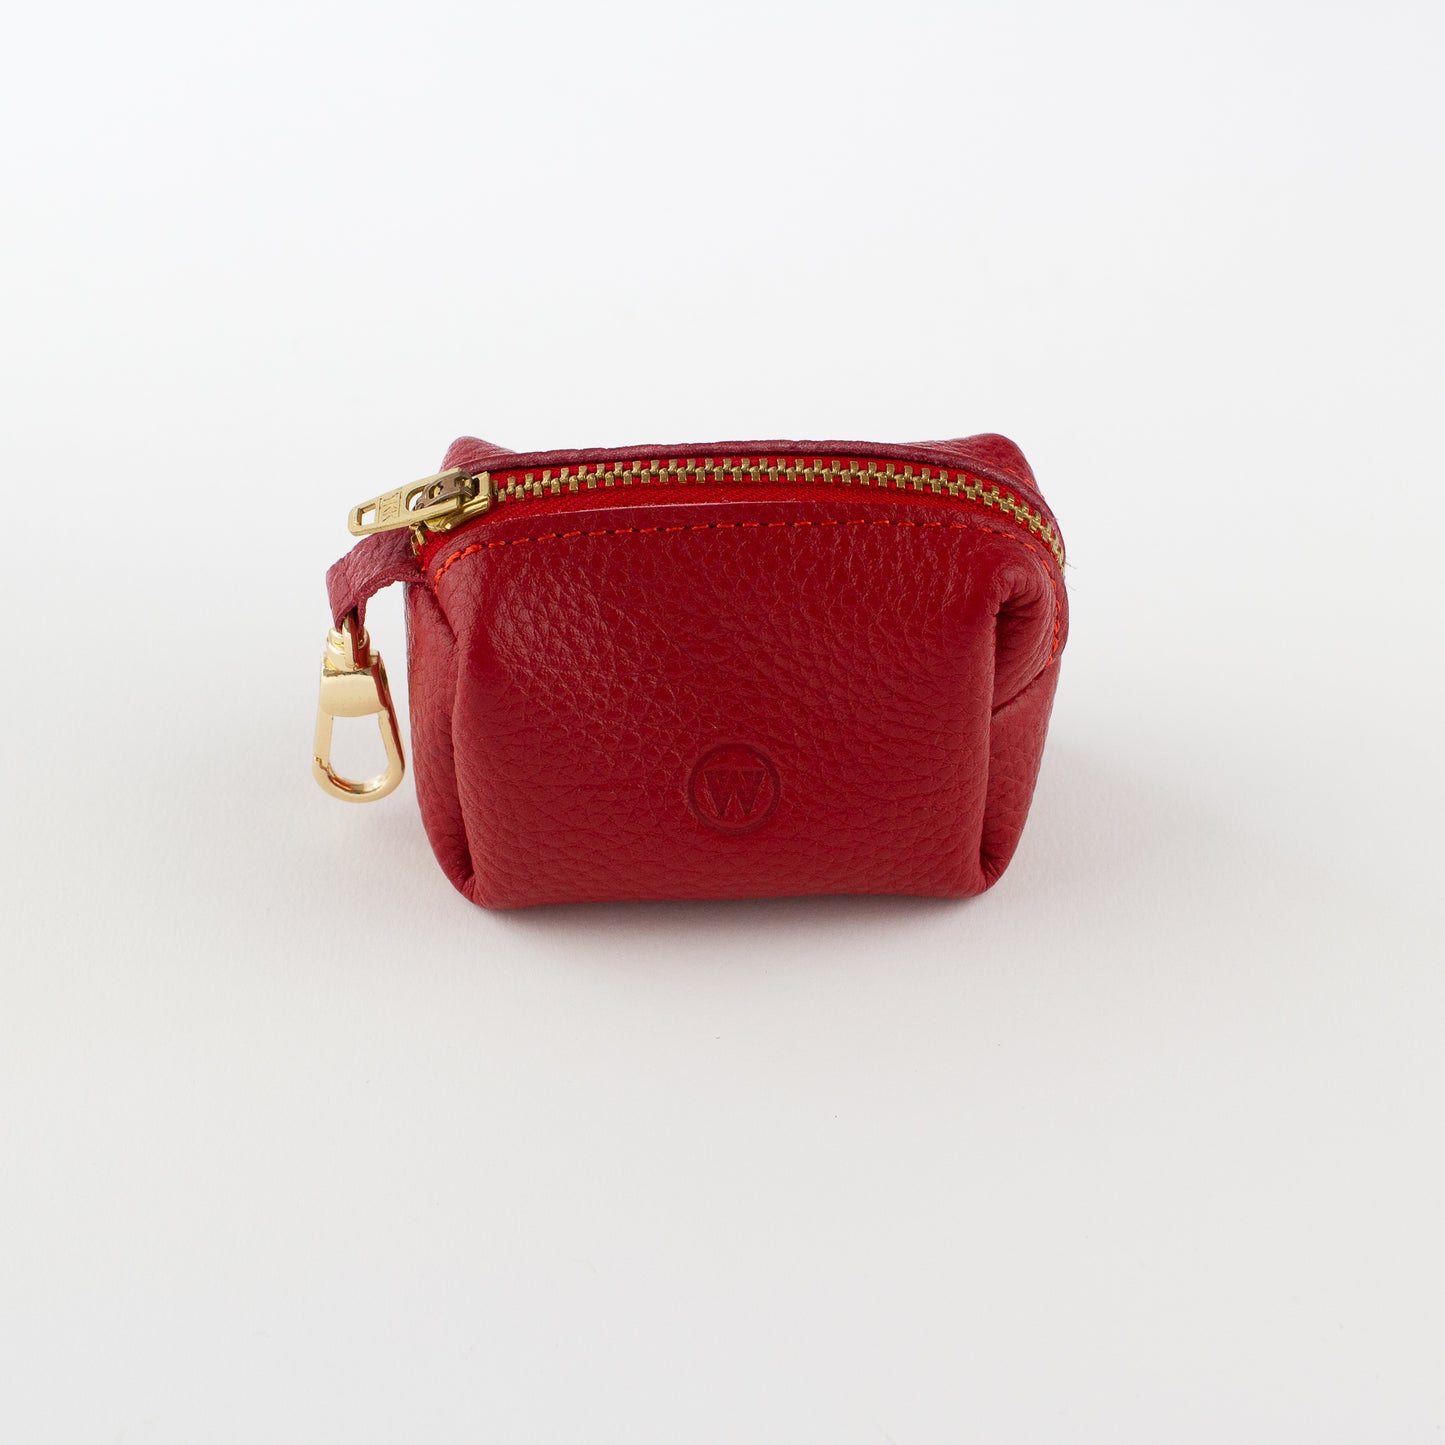 Red leather poo bag Willow Walks